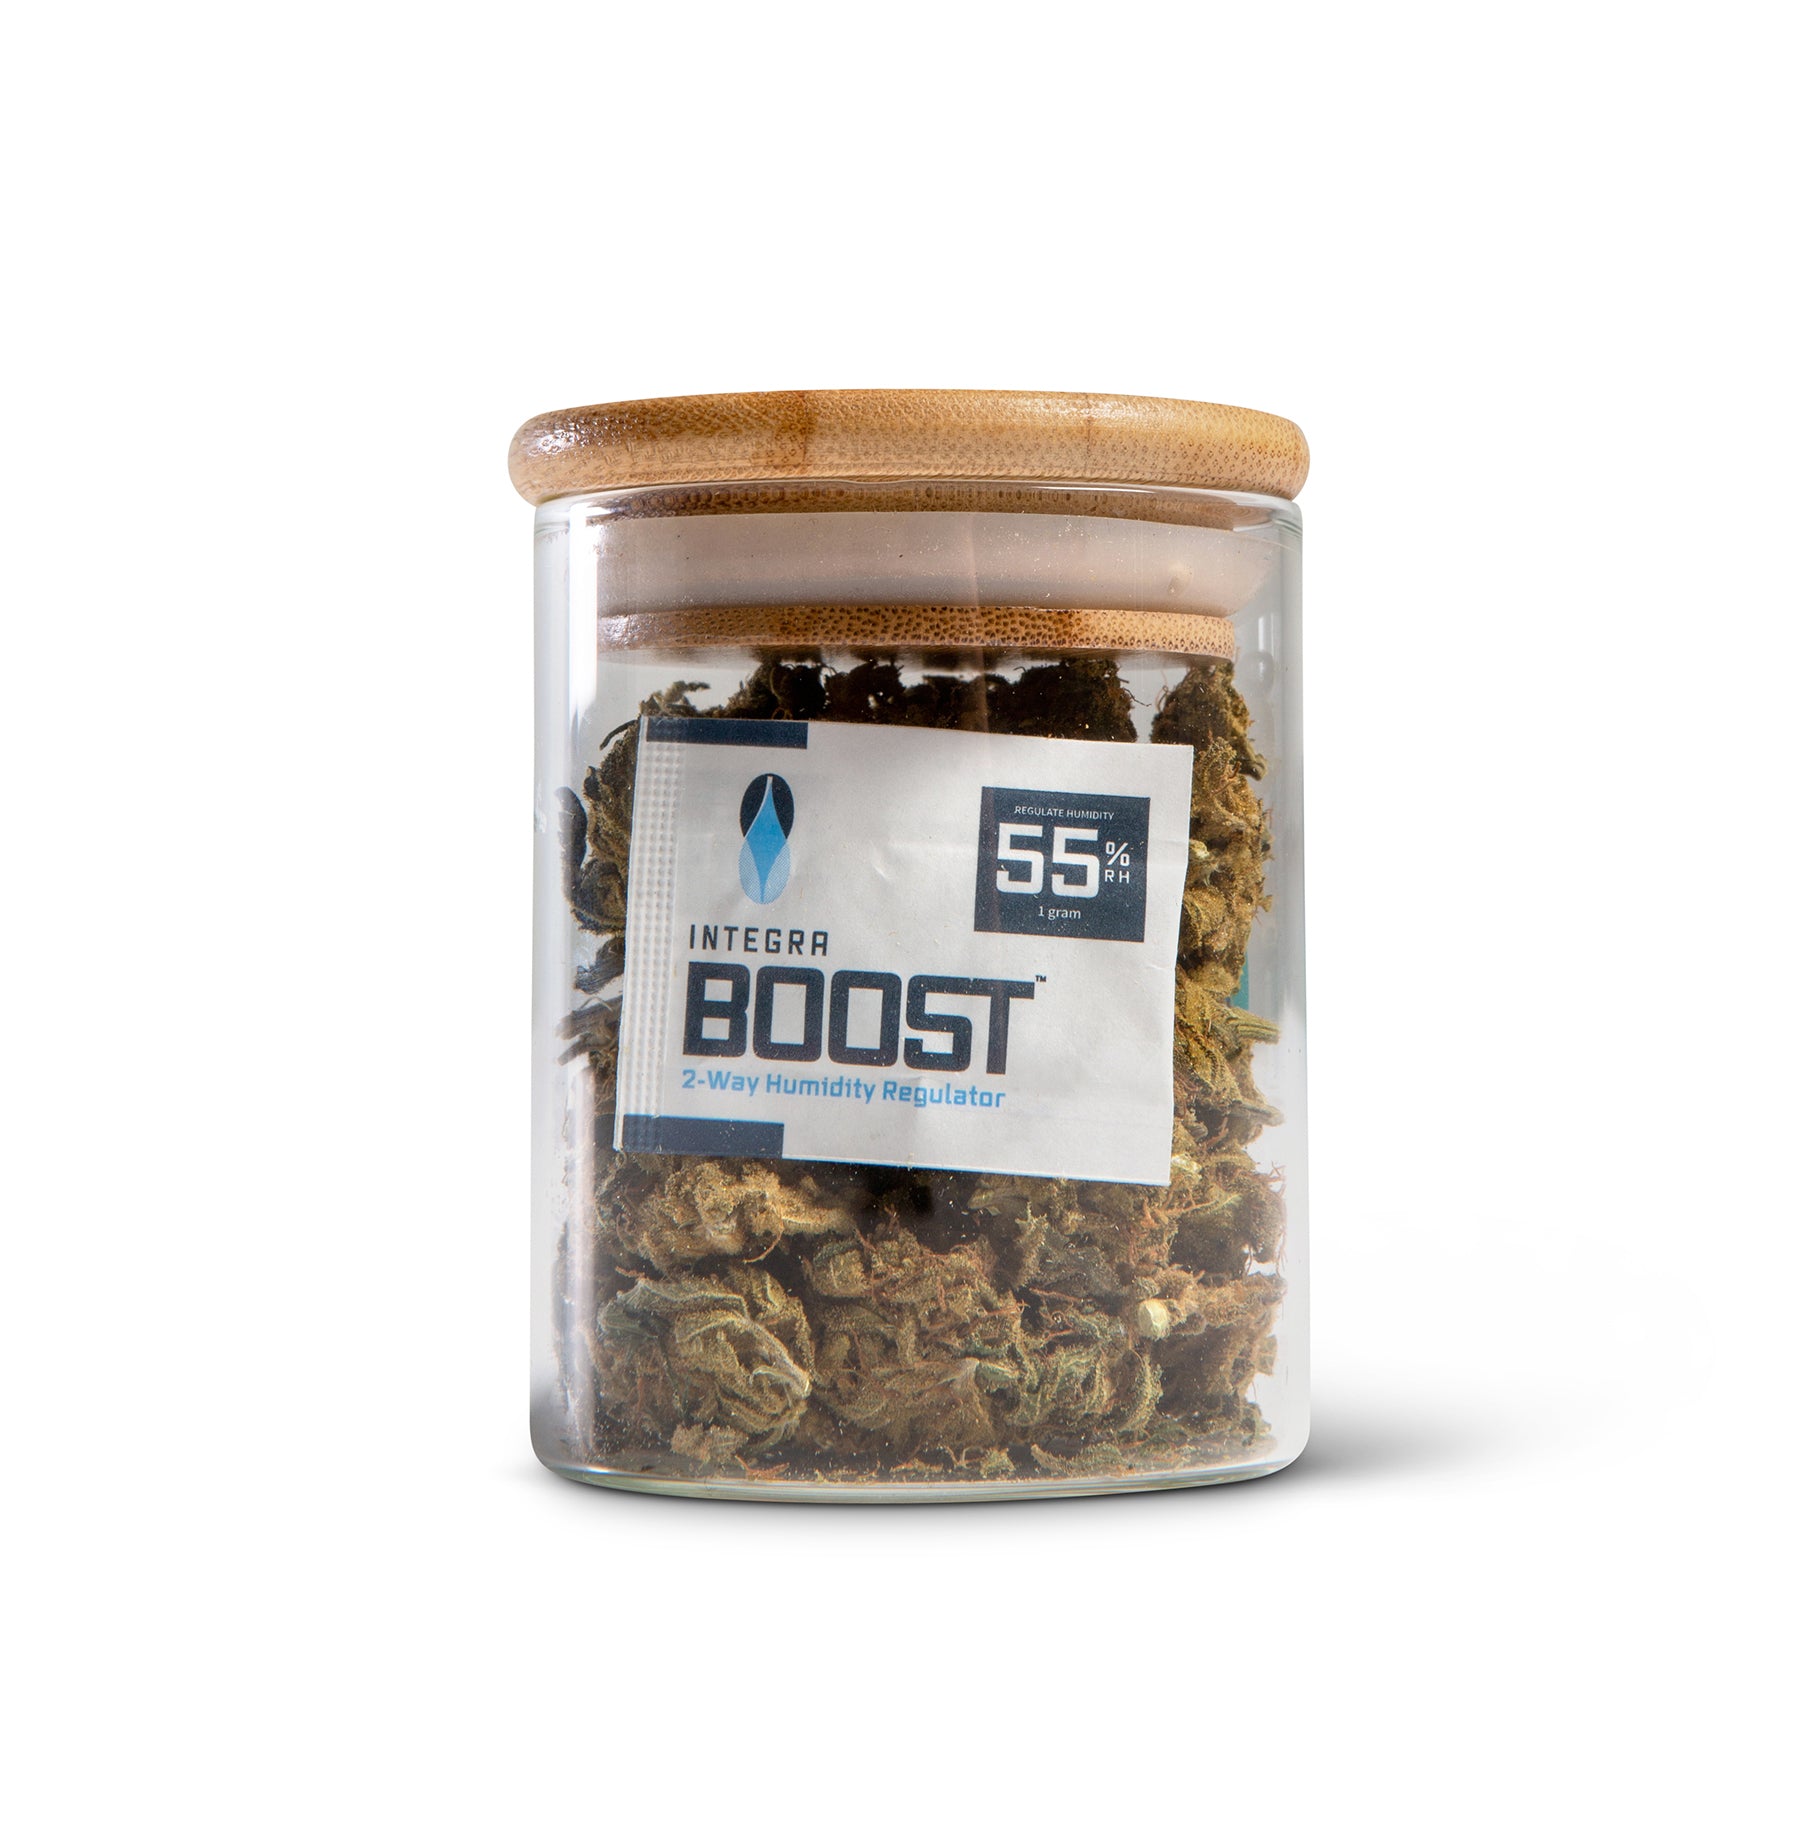 55% Integra Boost Humidity Control Packs - 8 Gram Size - 300 Count